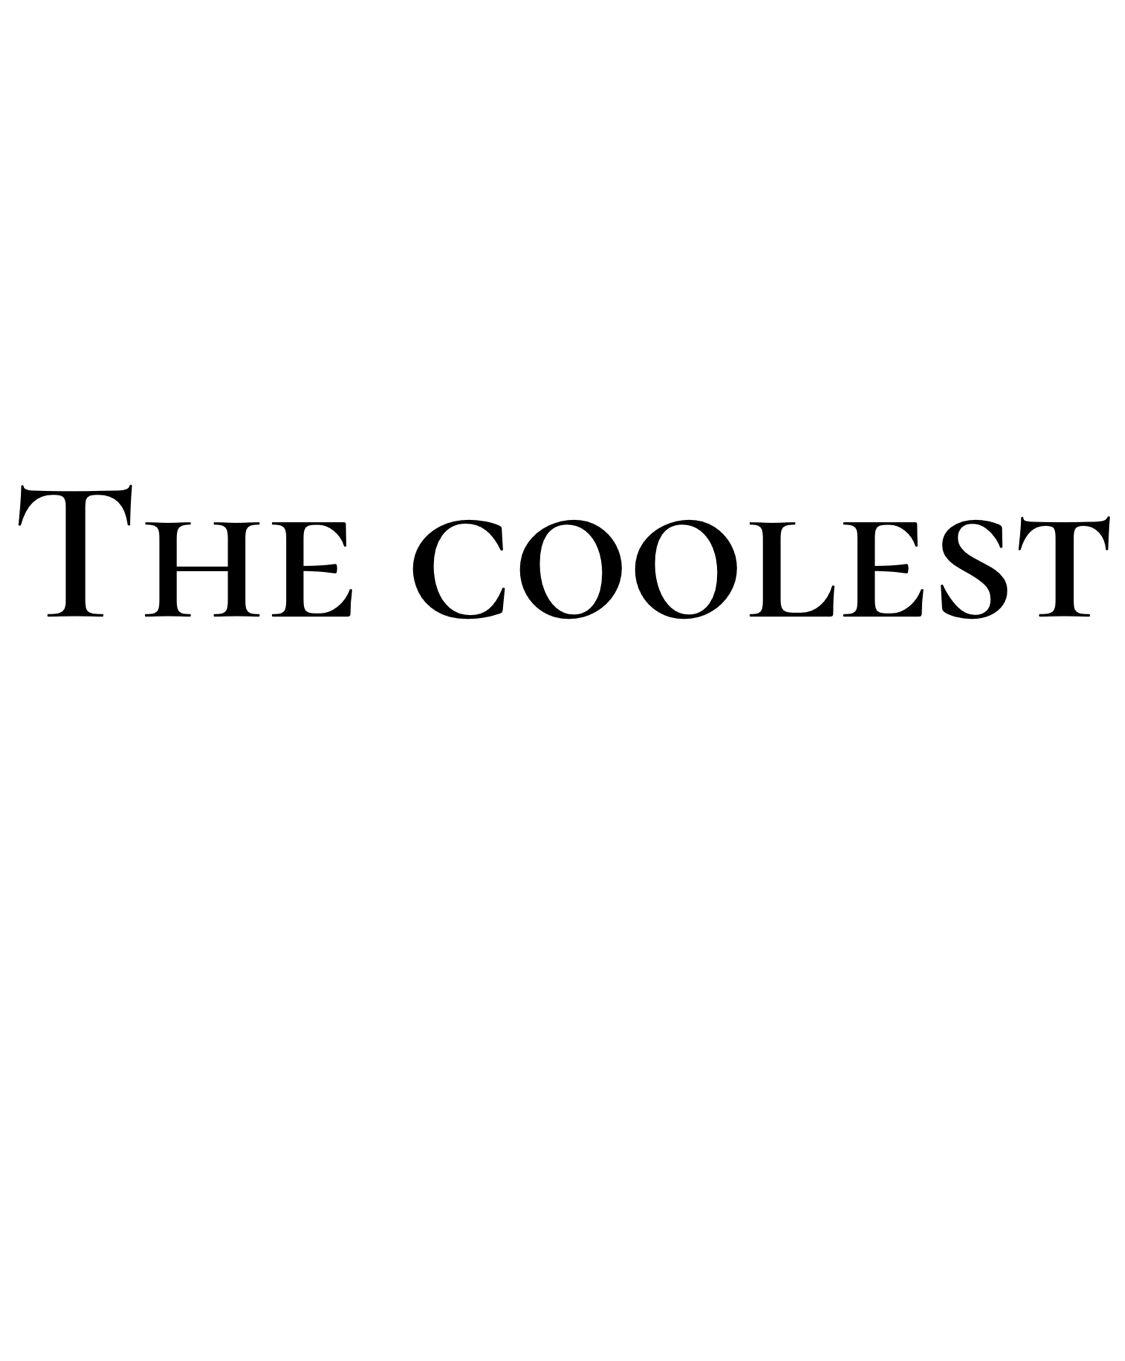 THE COOLEST